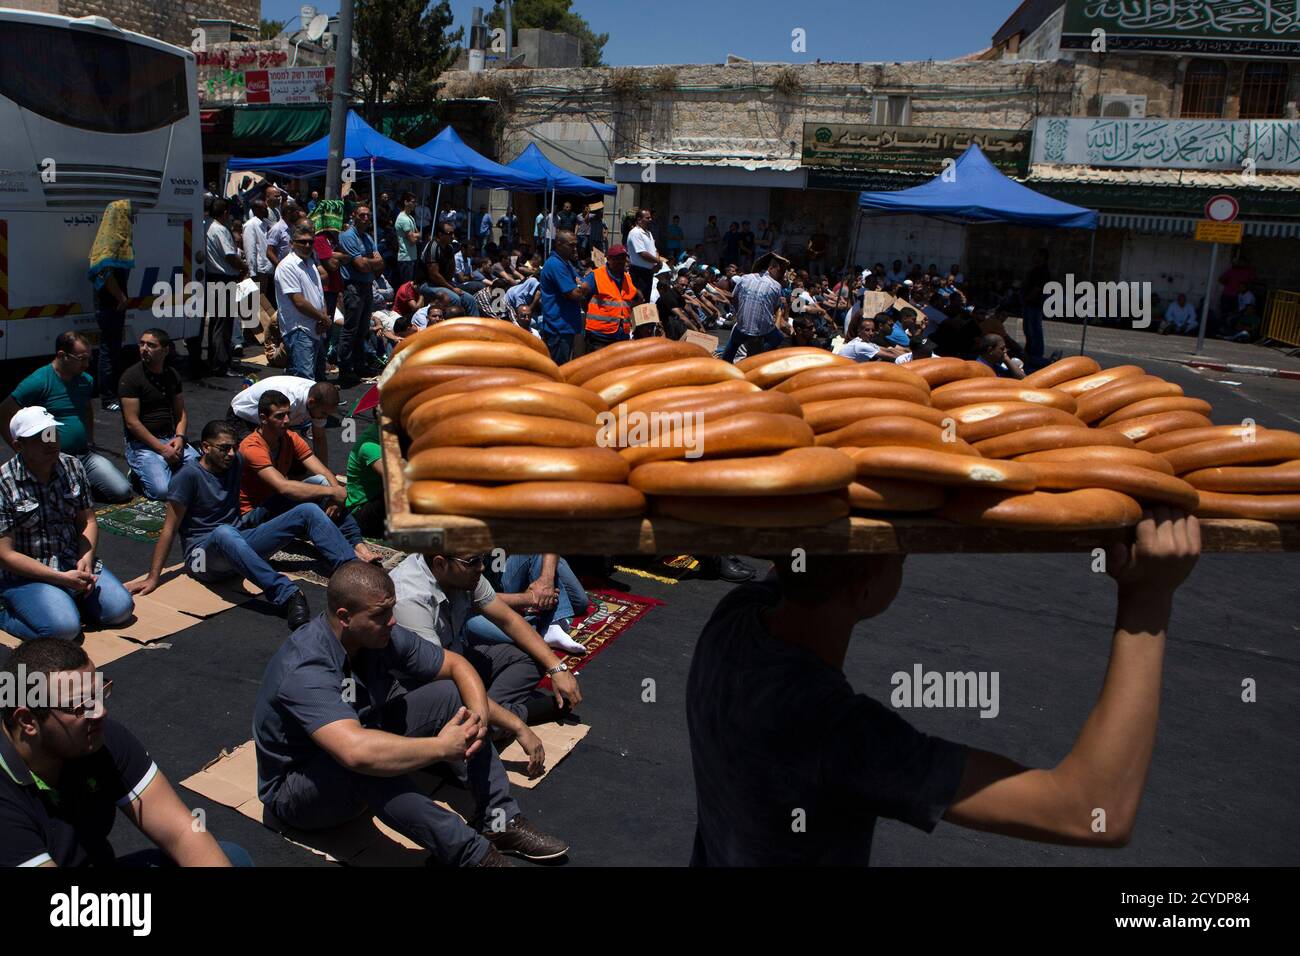 A youth walks by carrying loaves of bread as worshippers prepare to pray on the last Friday of the holy month of Ramadan close to the Damascus Gate of the Old City in Jerusalem July 25, 2014. REUTERS/Siegfried Modola (JERUSALEM - Tags: RELIGION FOOD) Stock Photo